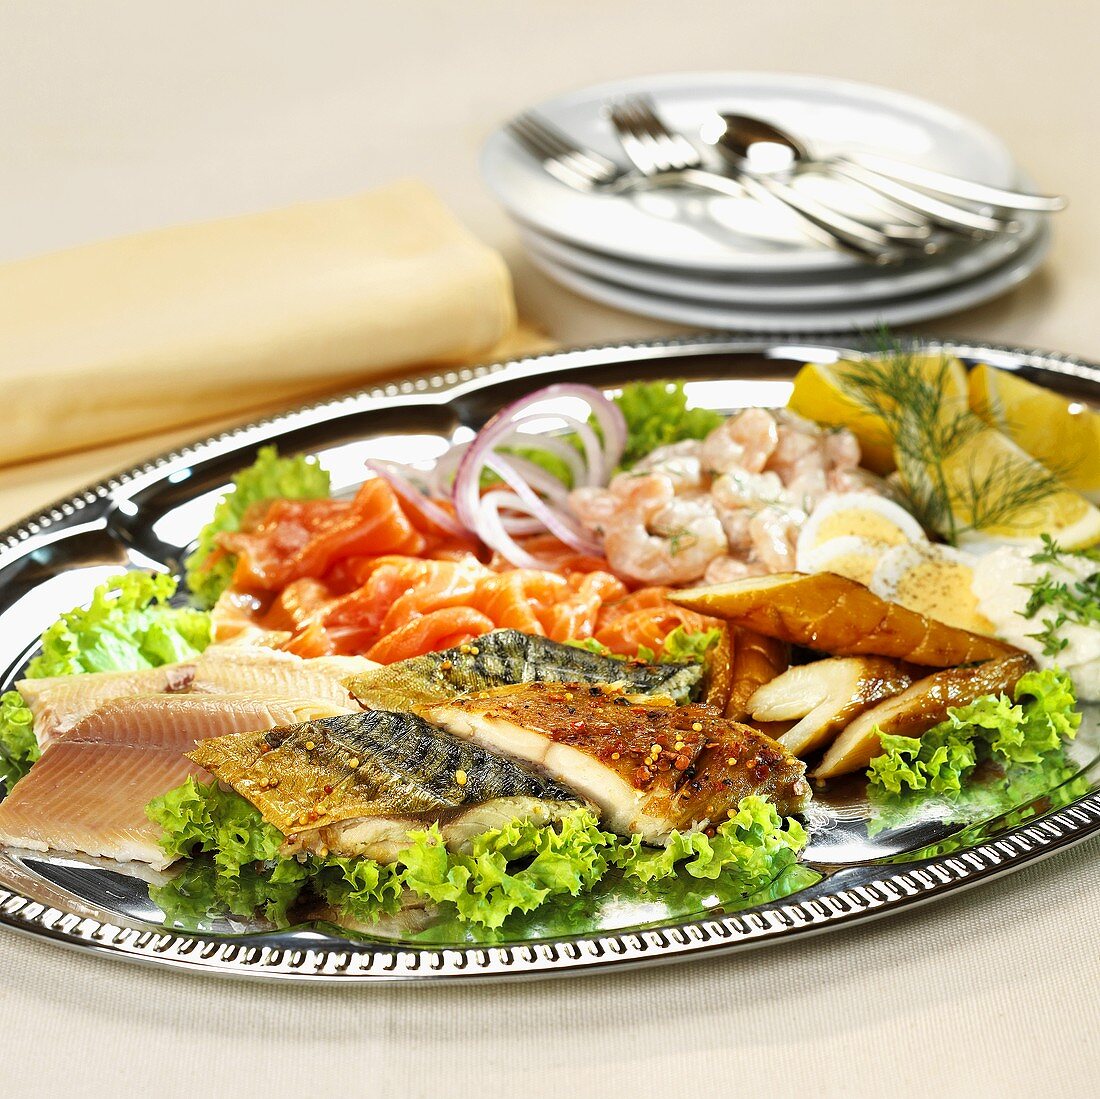 Cold fish platter with shrimps